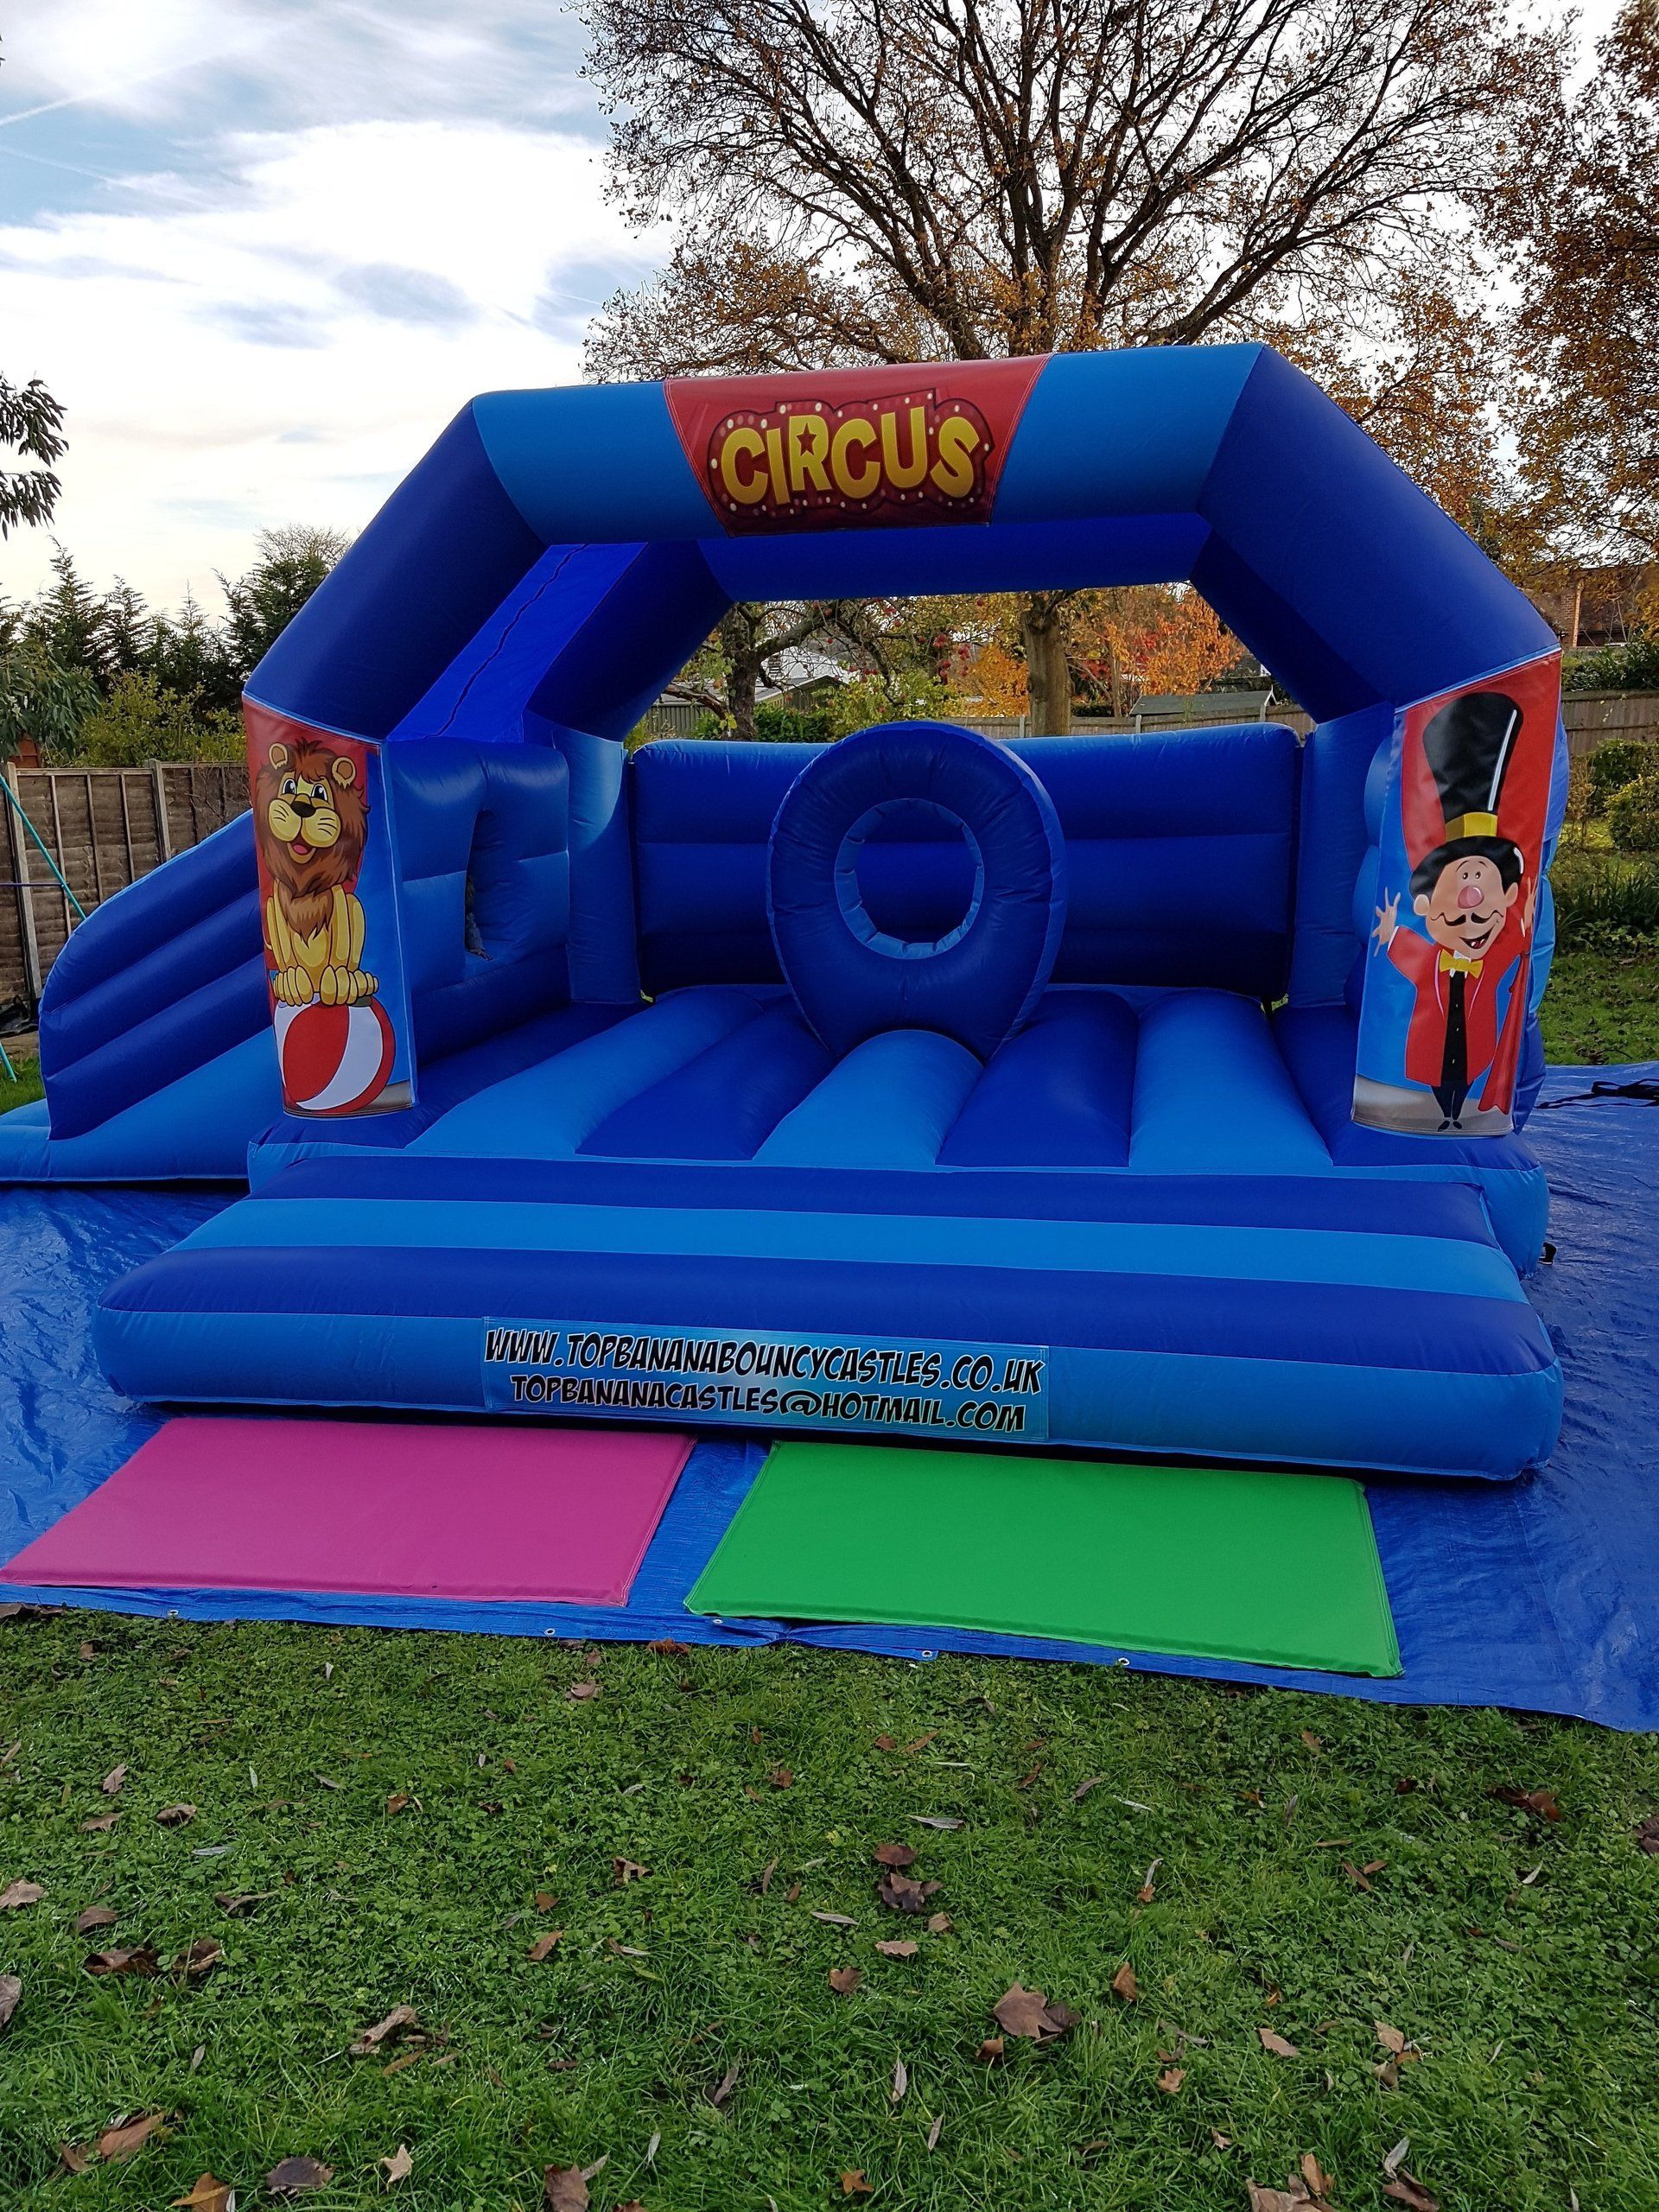 large bouncy castle with circus artwork